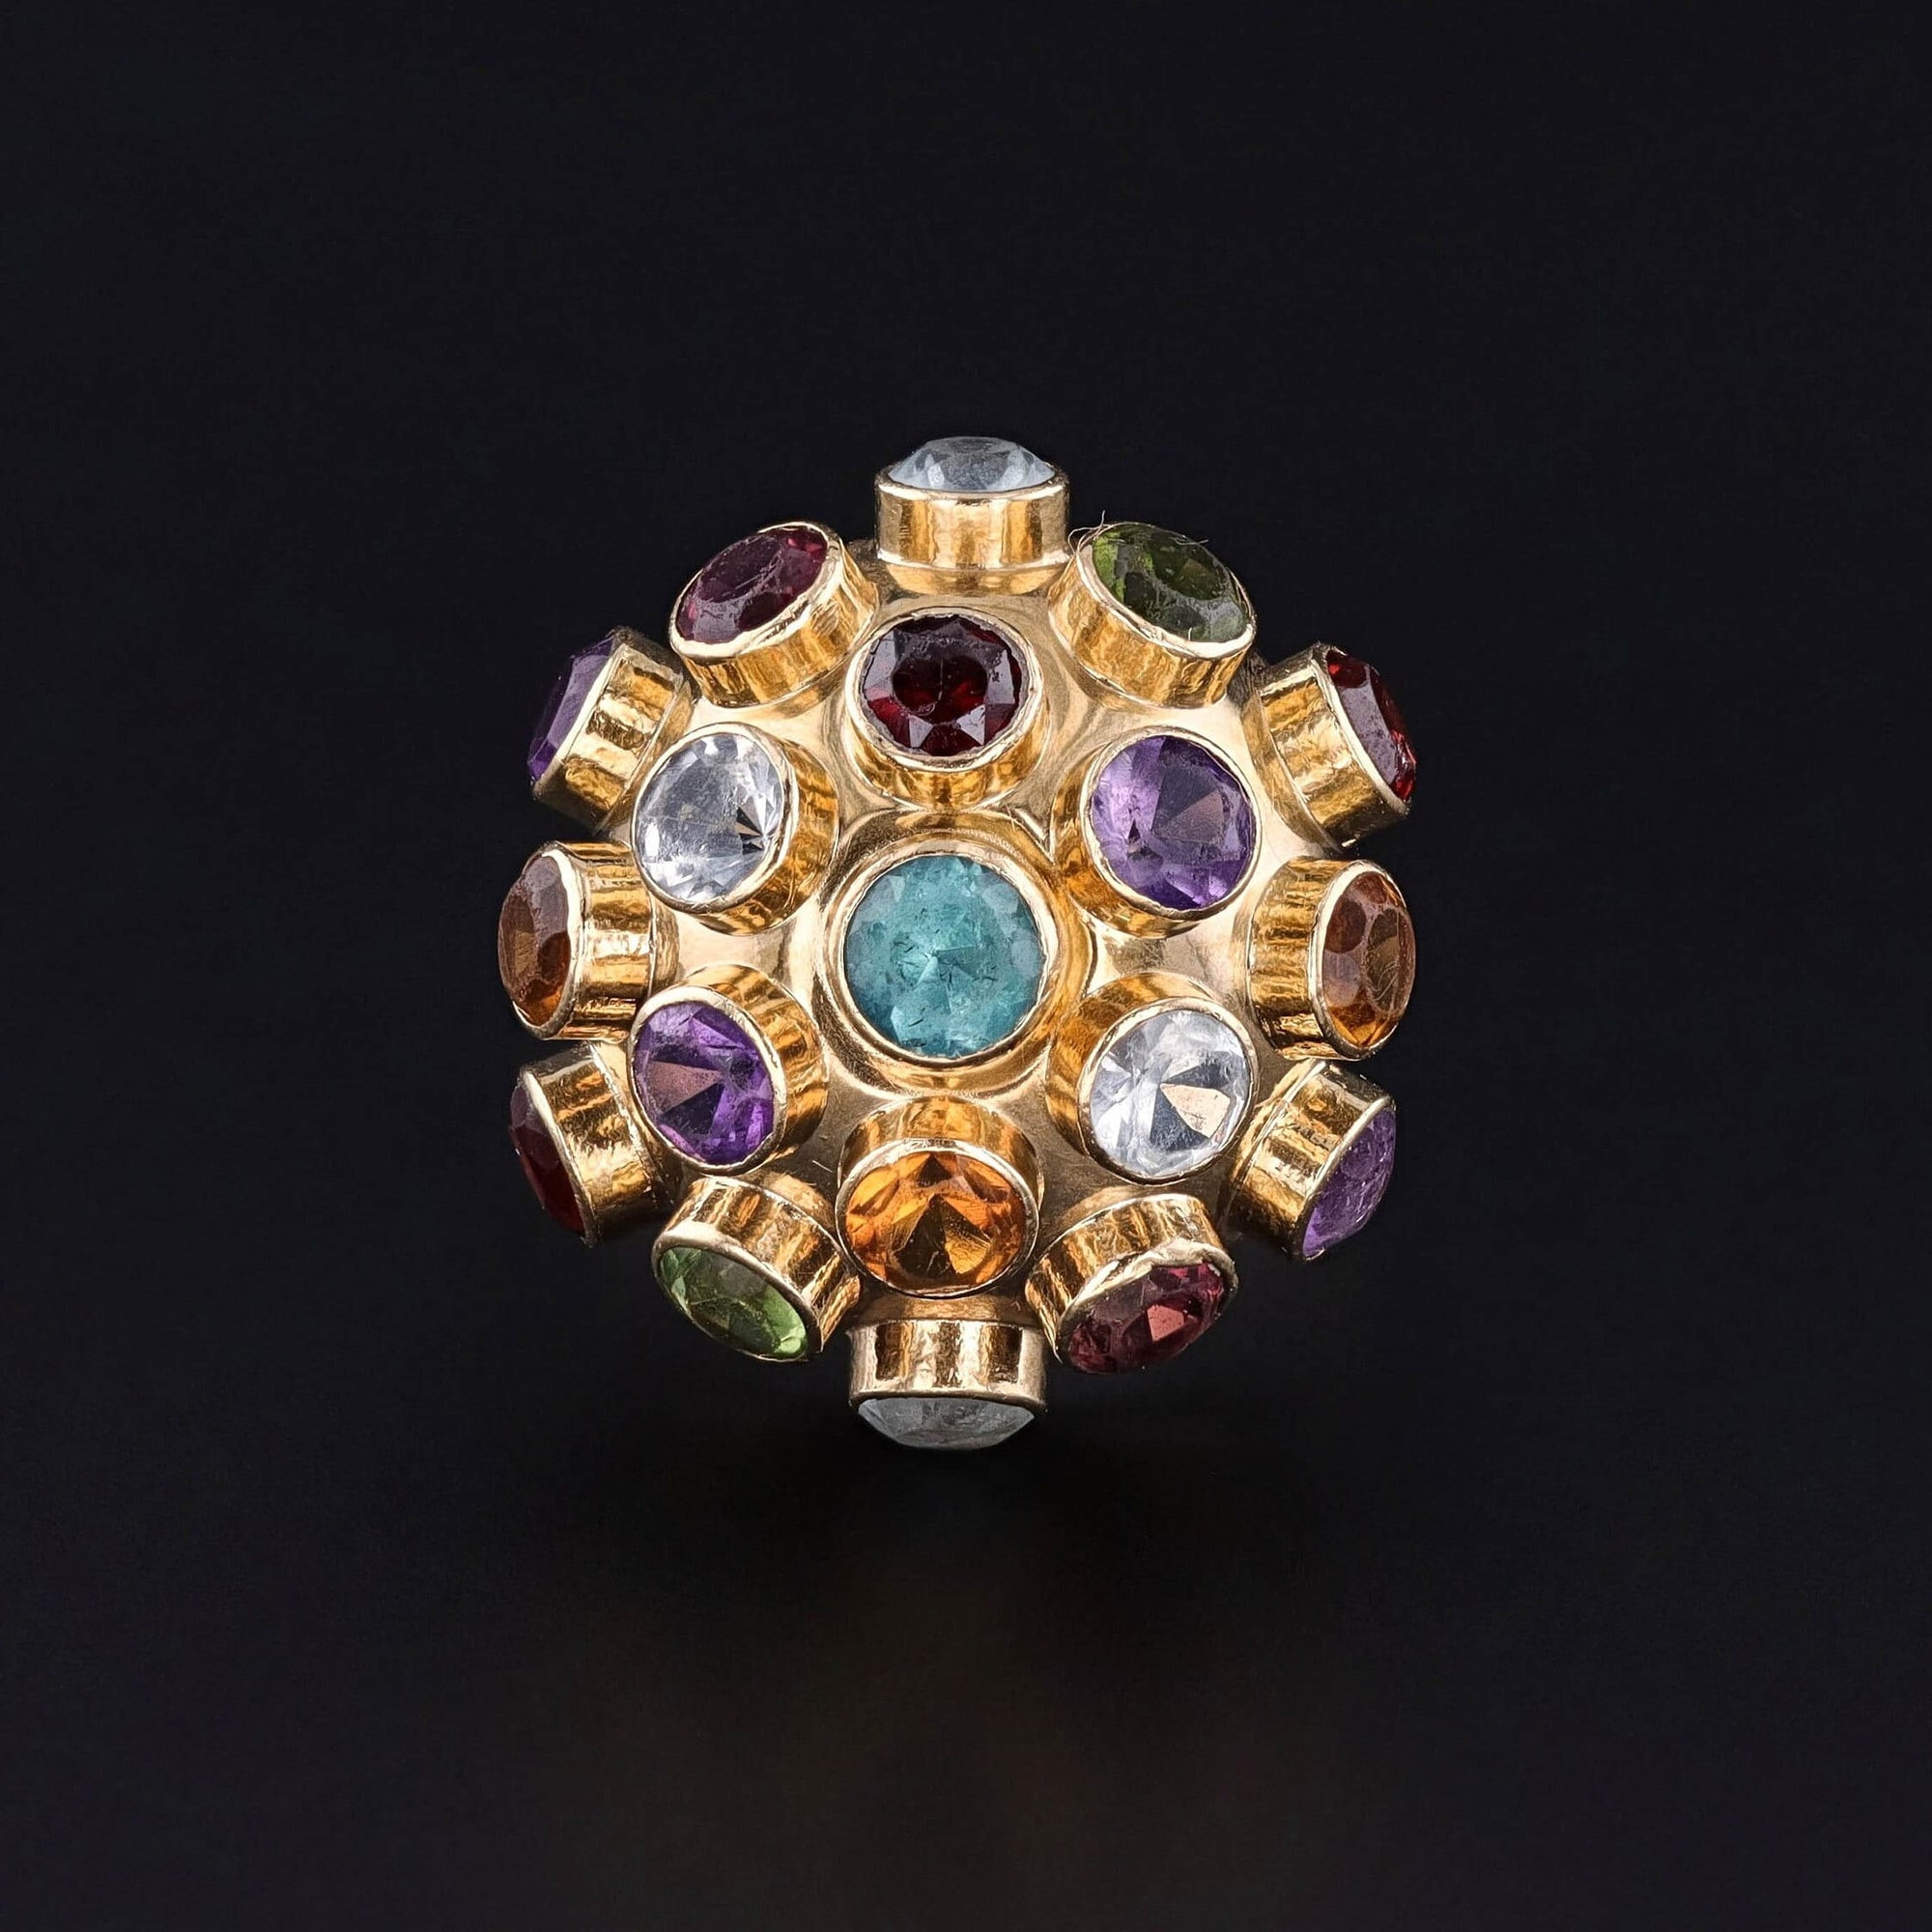 A 1960s Sputnik style gemstone ring showcasing a colorful array of assorted gemstones mounted in 18k gold. The ring features tourmaline, amethyst, citrine, peridot, garnet, and spodumene. Perfect for any mid-century jewelry collector.